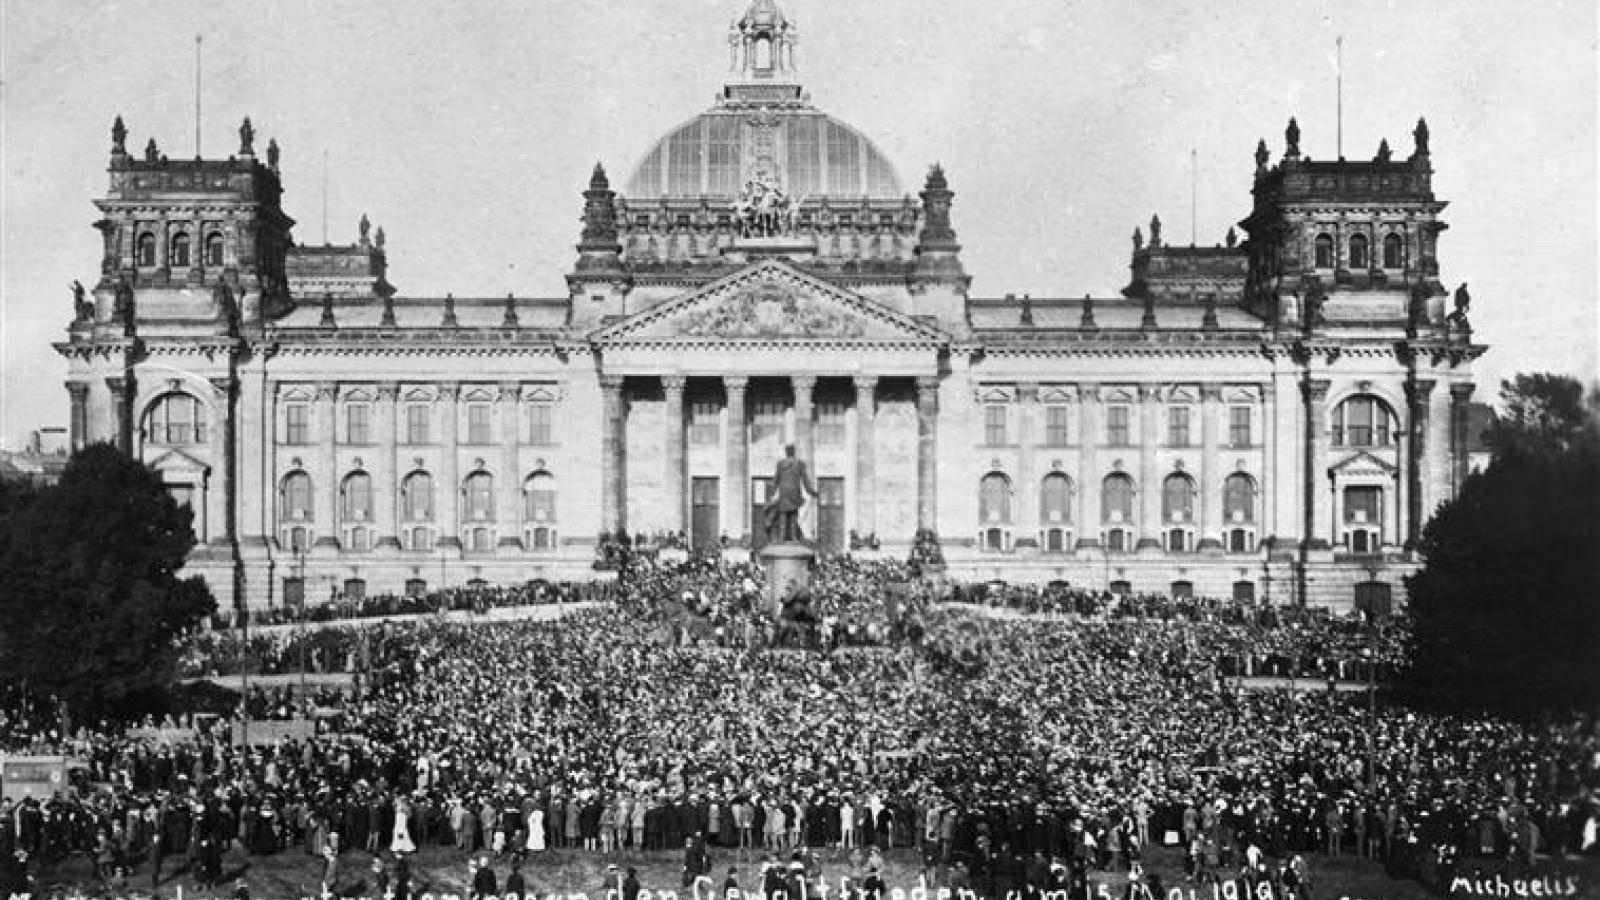 Mass_demonstration_in_front_of_the_Reichstag_against_the_Treaty_of_Versailles.jpg